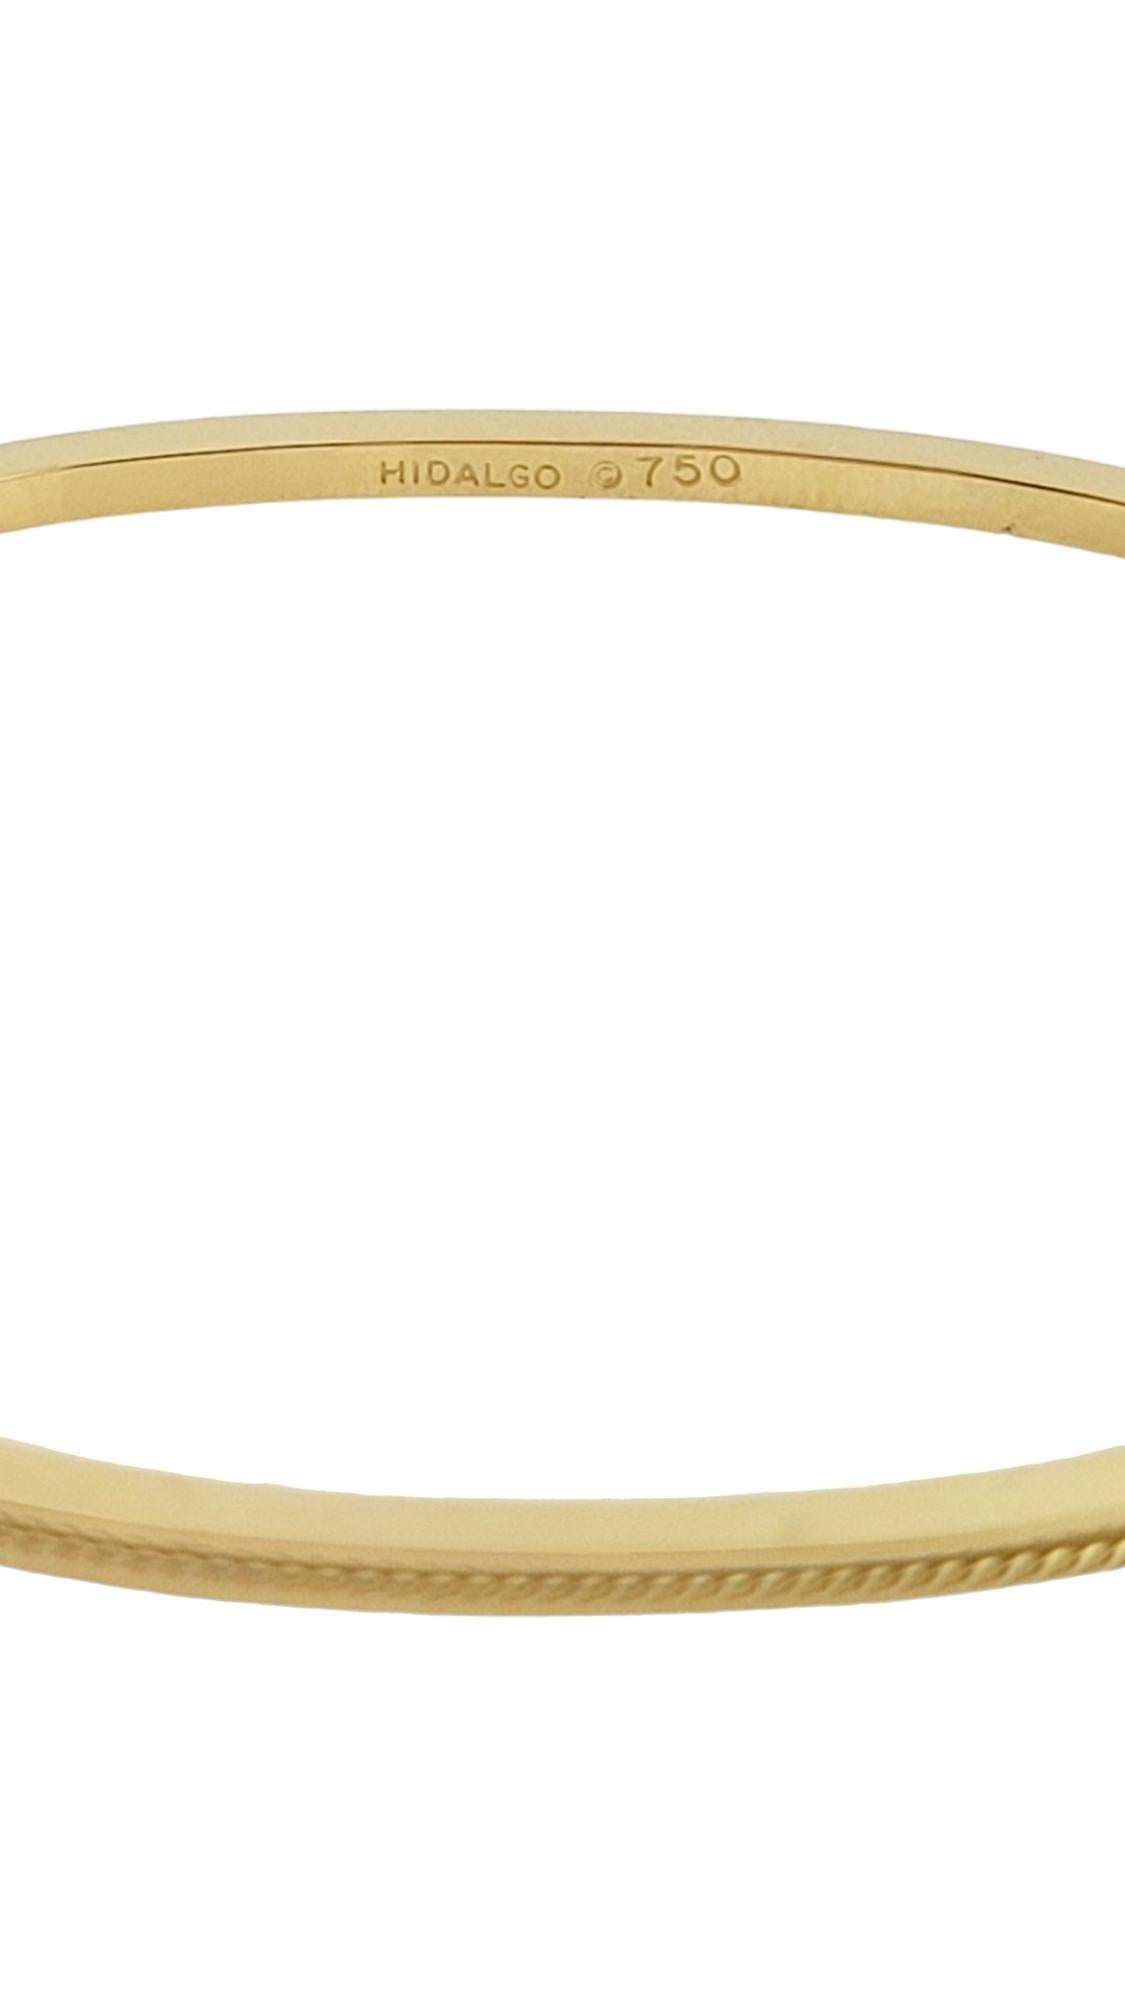 Hidalgo 18K Yellow Gold Oval Rope Accented Bangle Bracelet #16506 For Sale 2